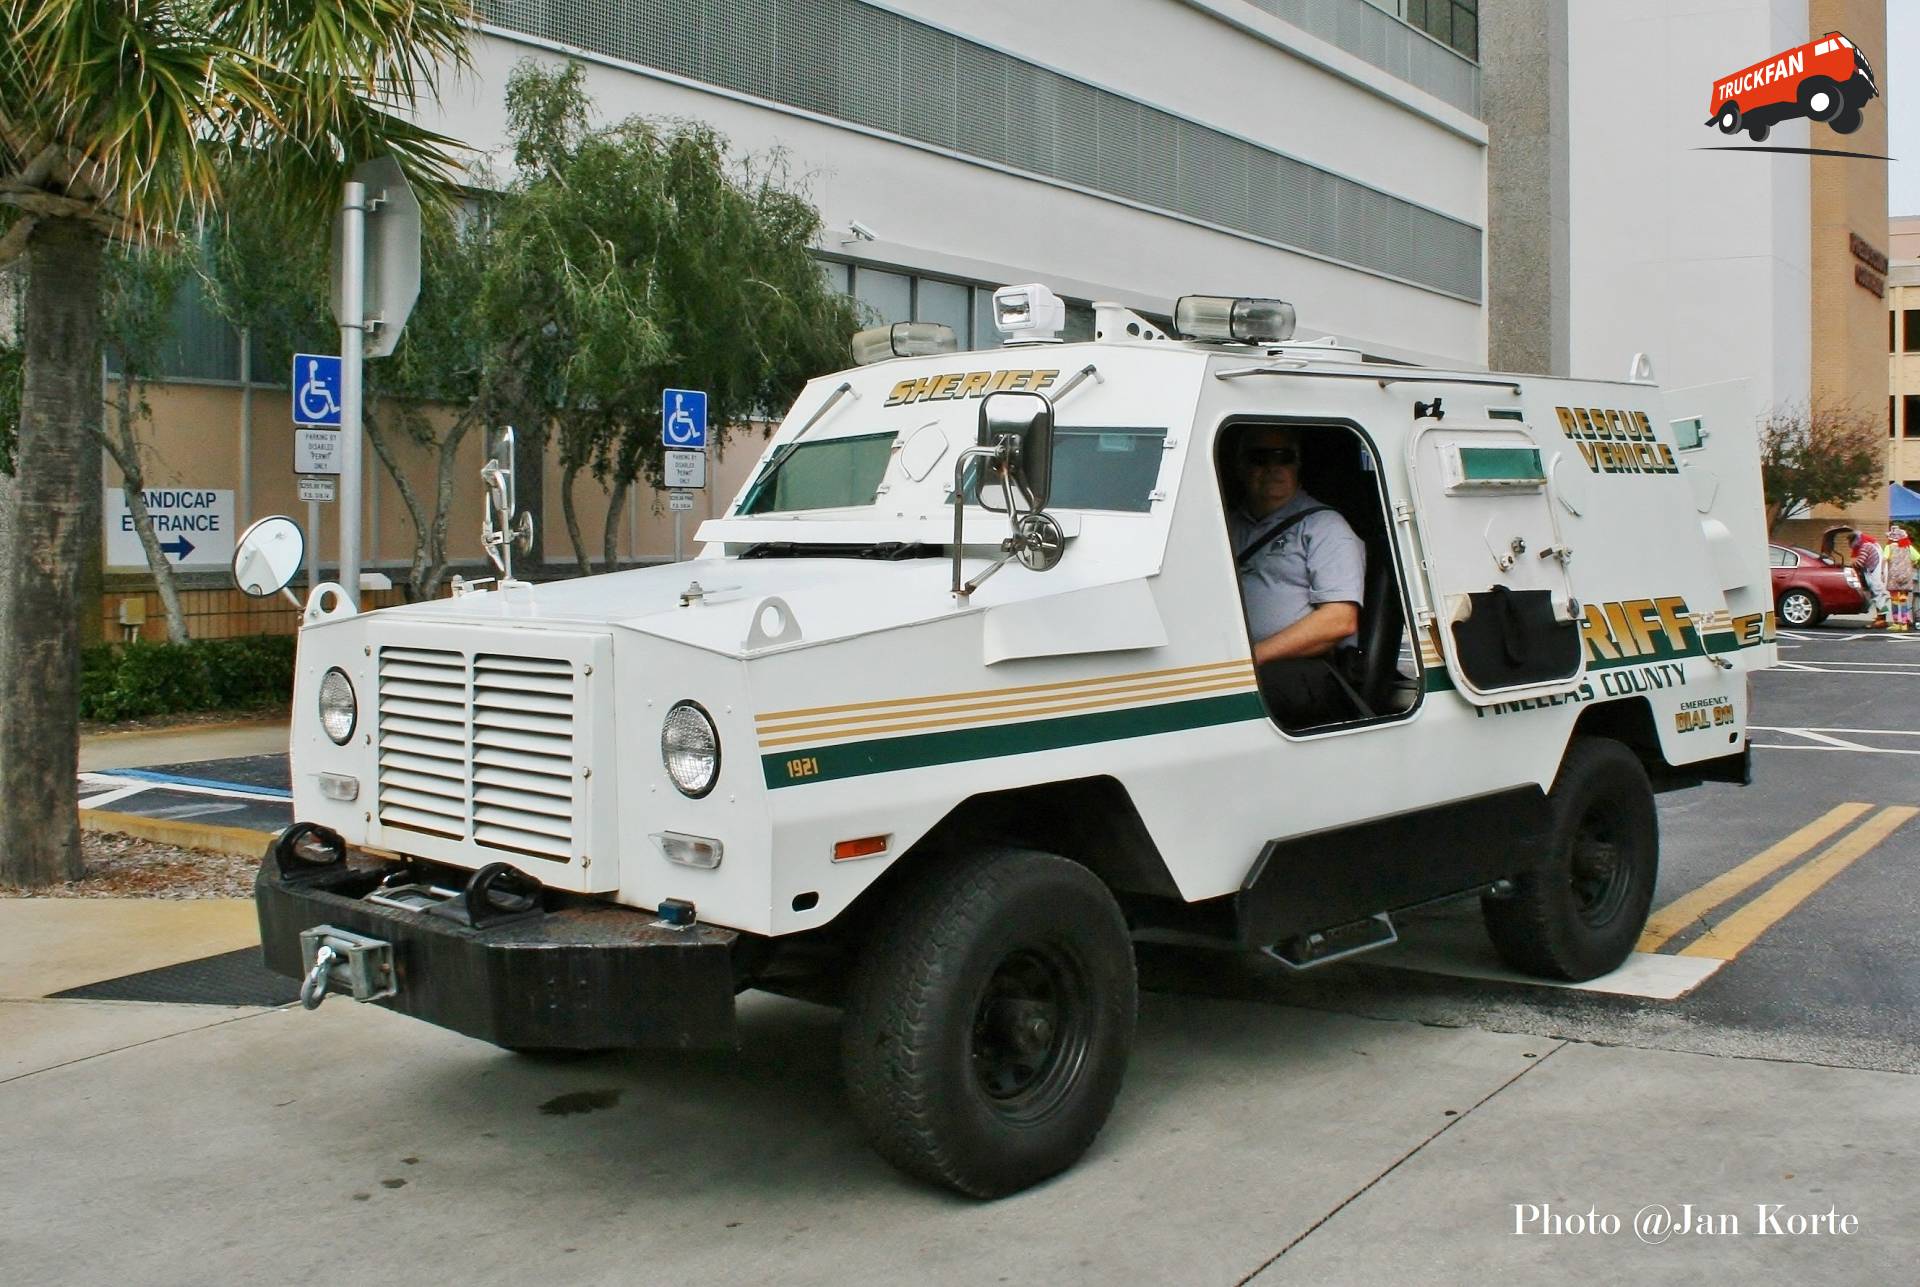 Peacekeeper Armored Rescue Vehicle